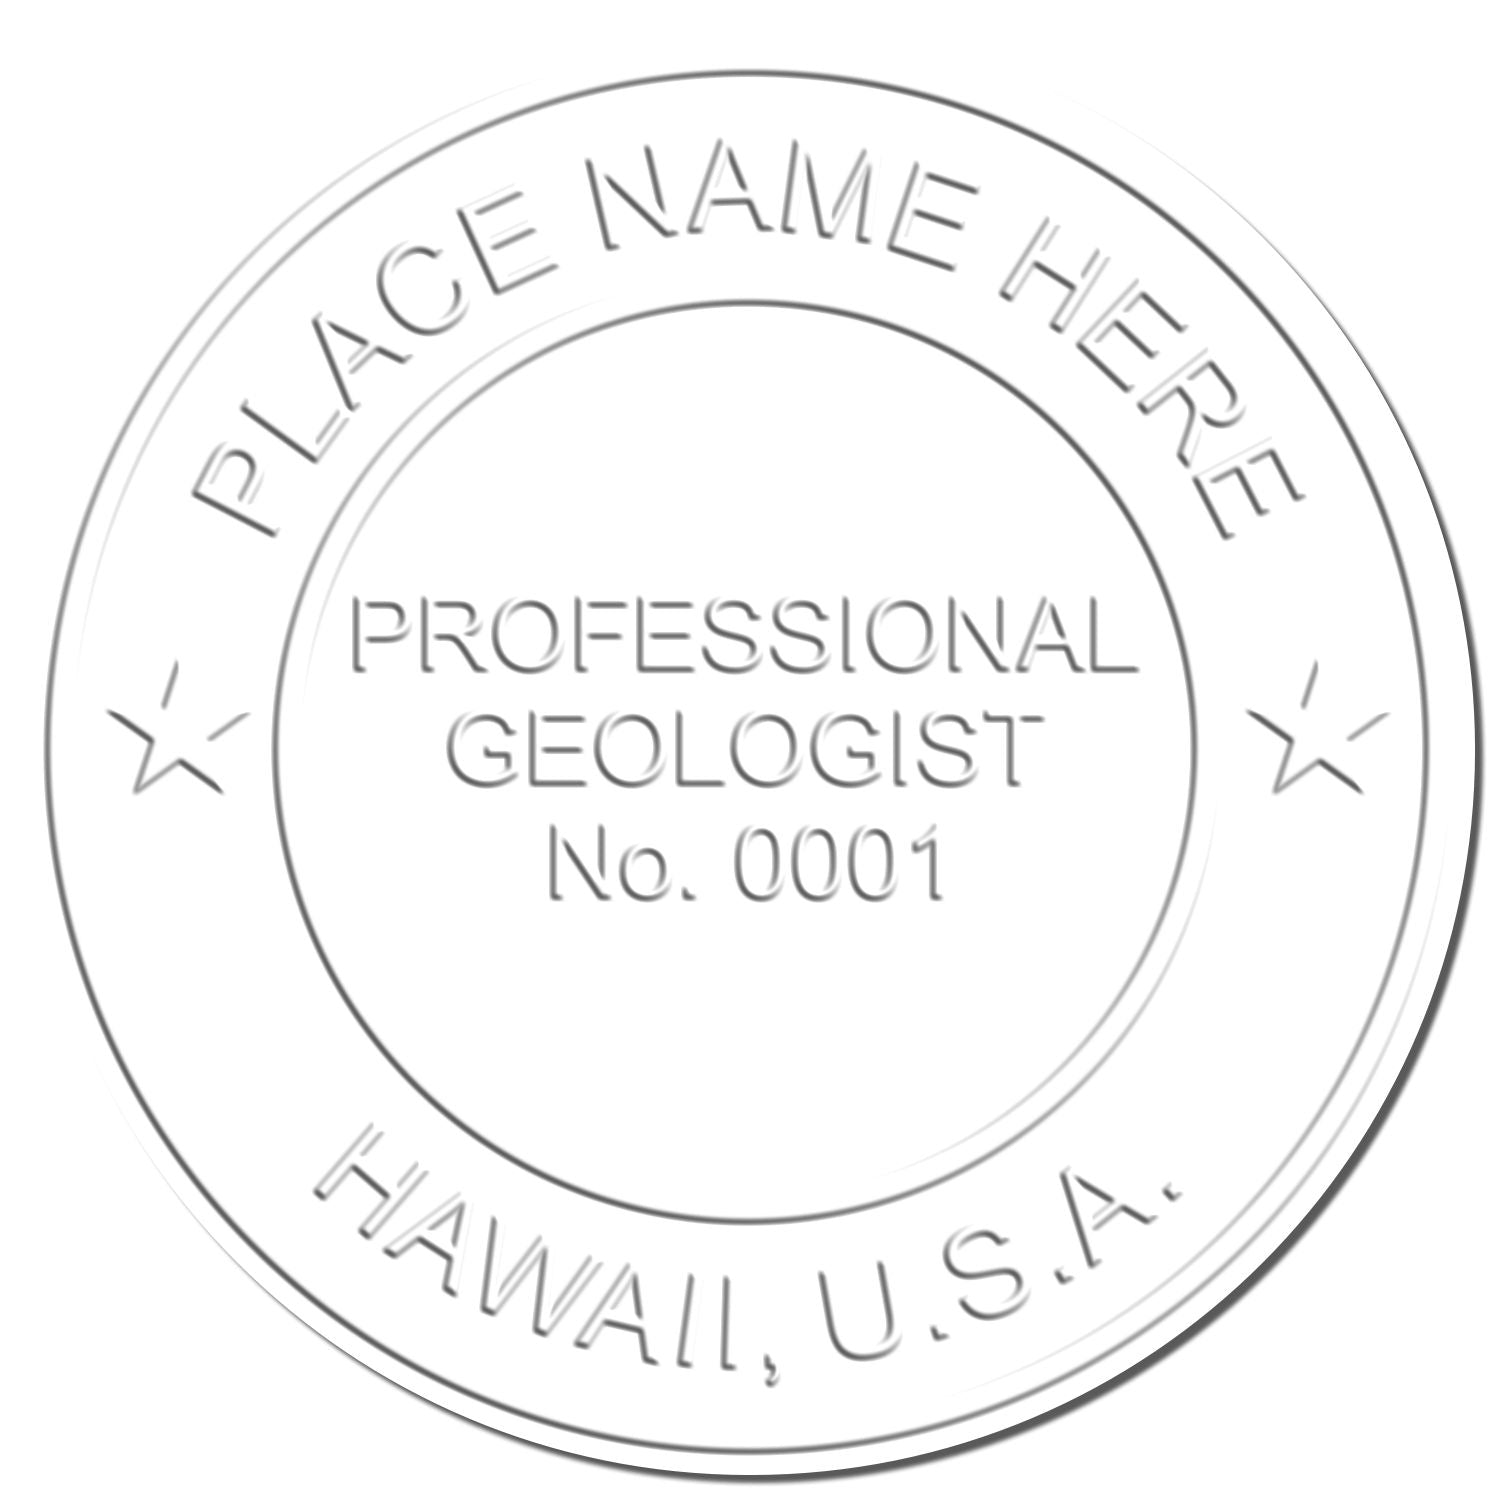 The main image for the Hawaii Geologist Desk Seal depicting a sample of the imprint and imprint sample